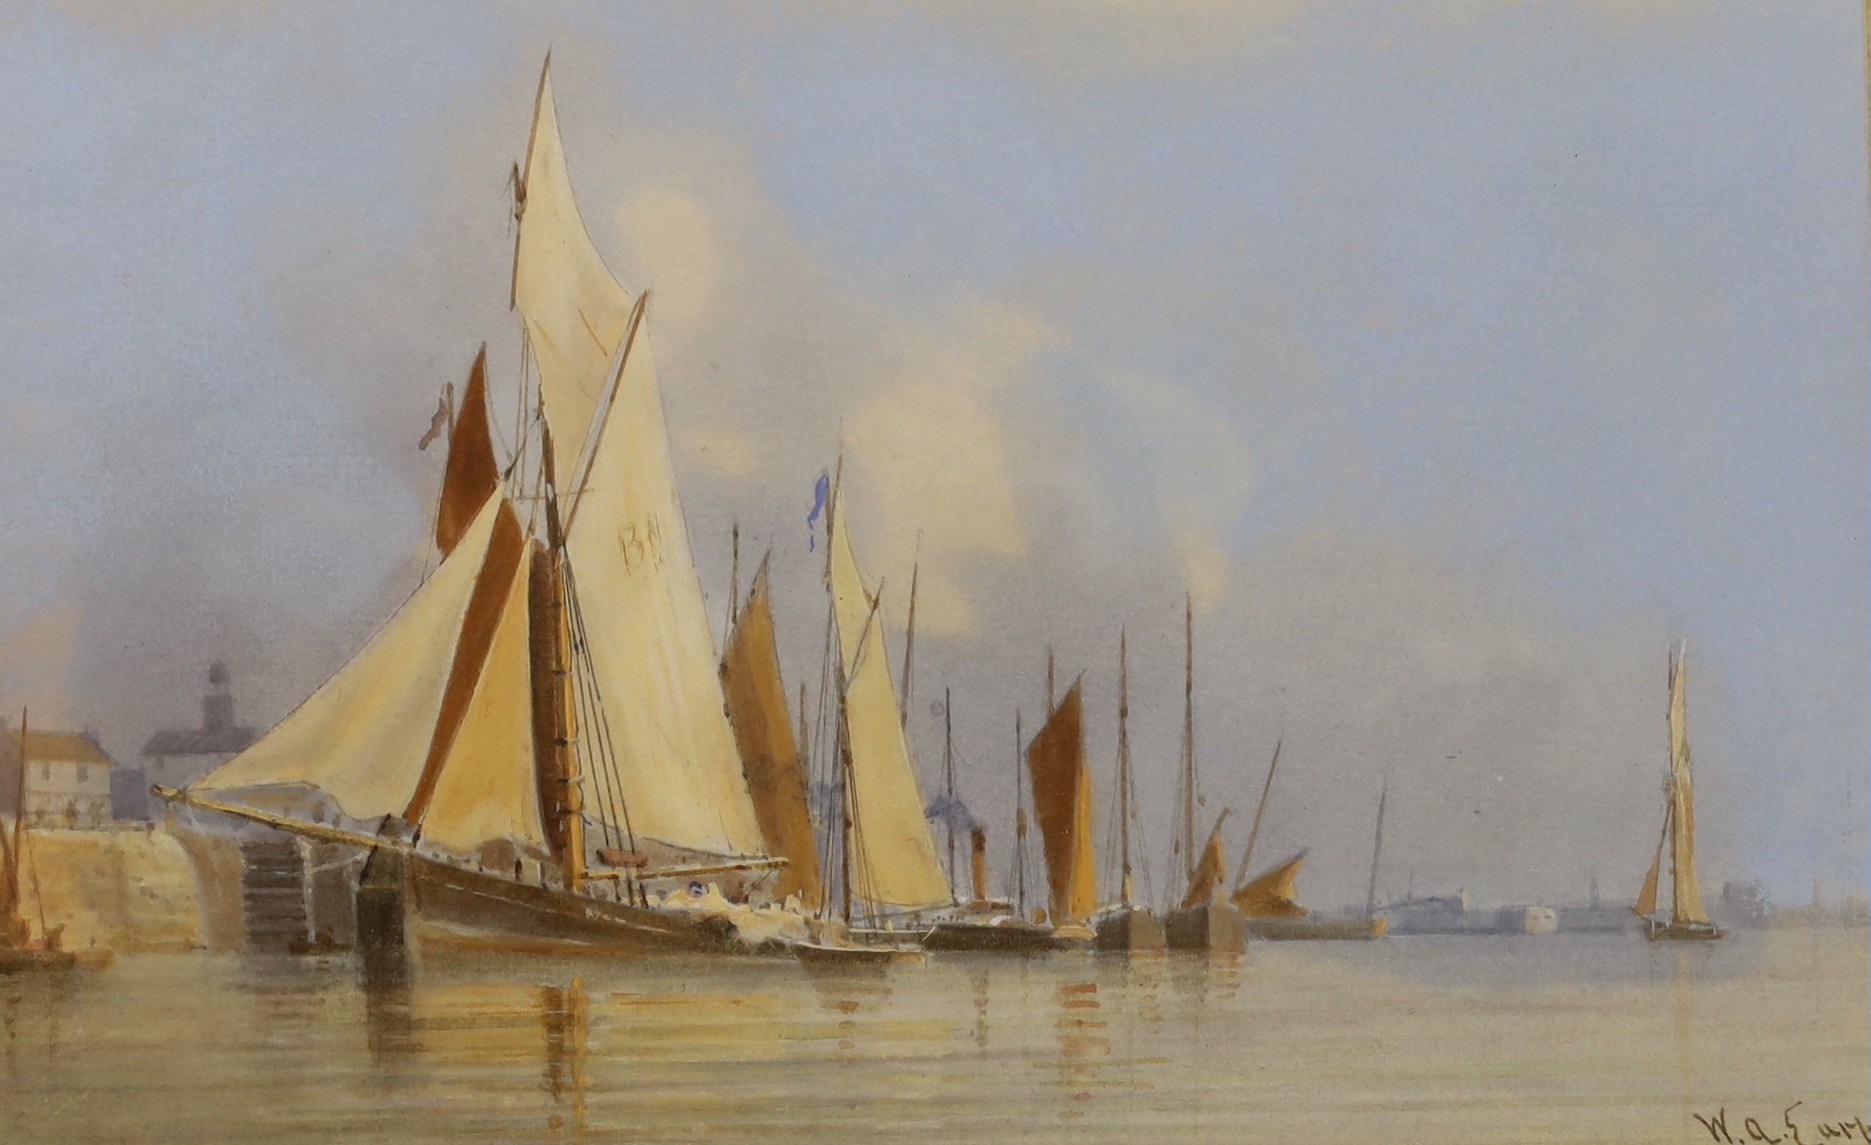 W. A. Earp (1830-1900), watercolour, Boulogne Harbour trawlers, signed, 14.5 x 23cm